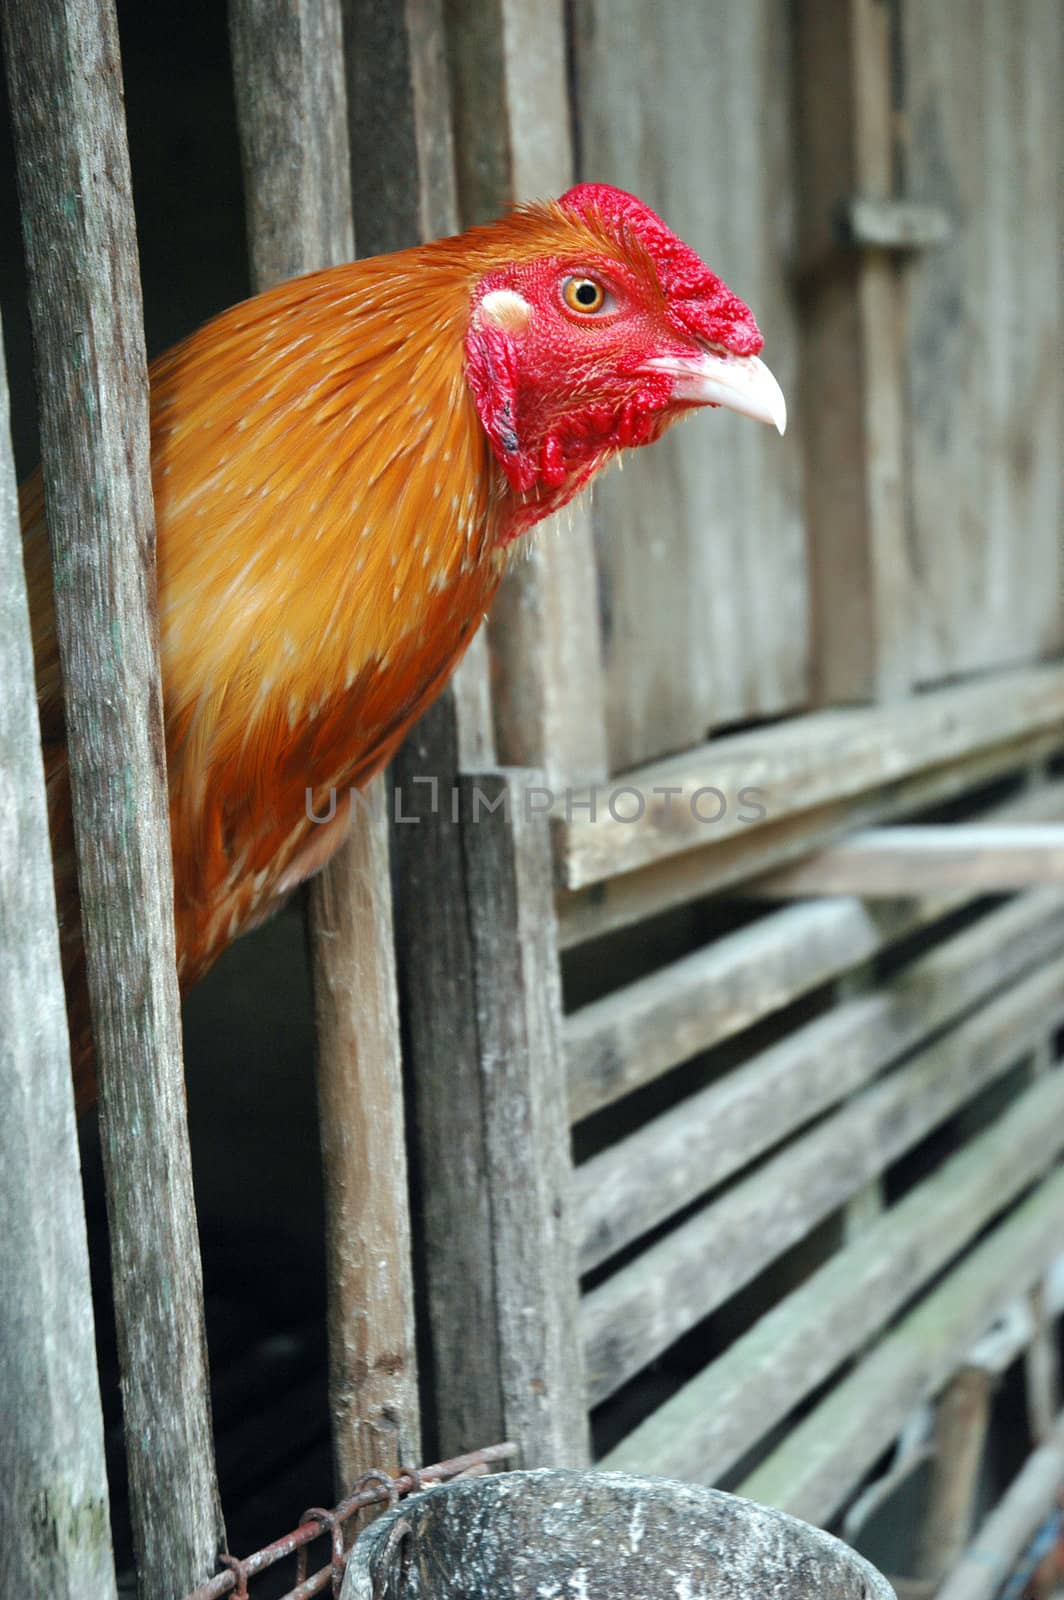 rooster in wooden cage